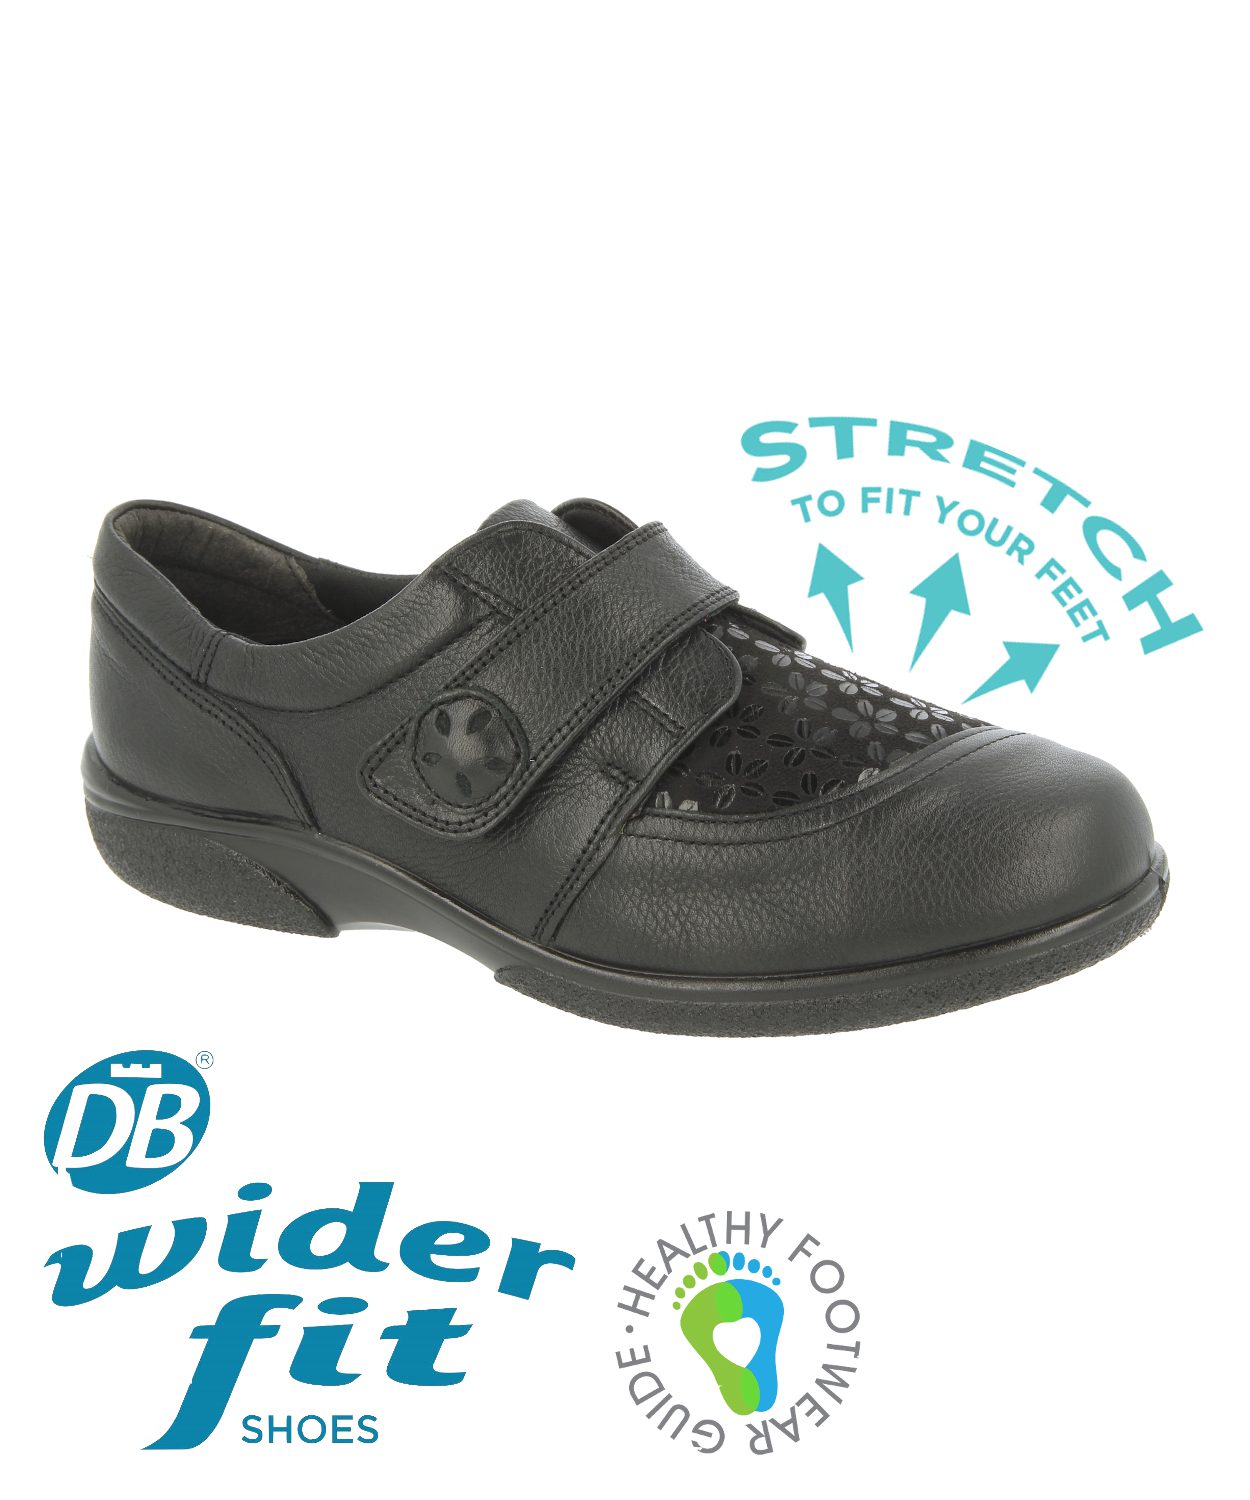 DB Wider Fit Ladies Shoes - Stockist of 